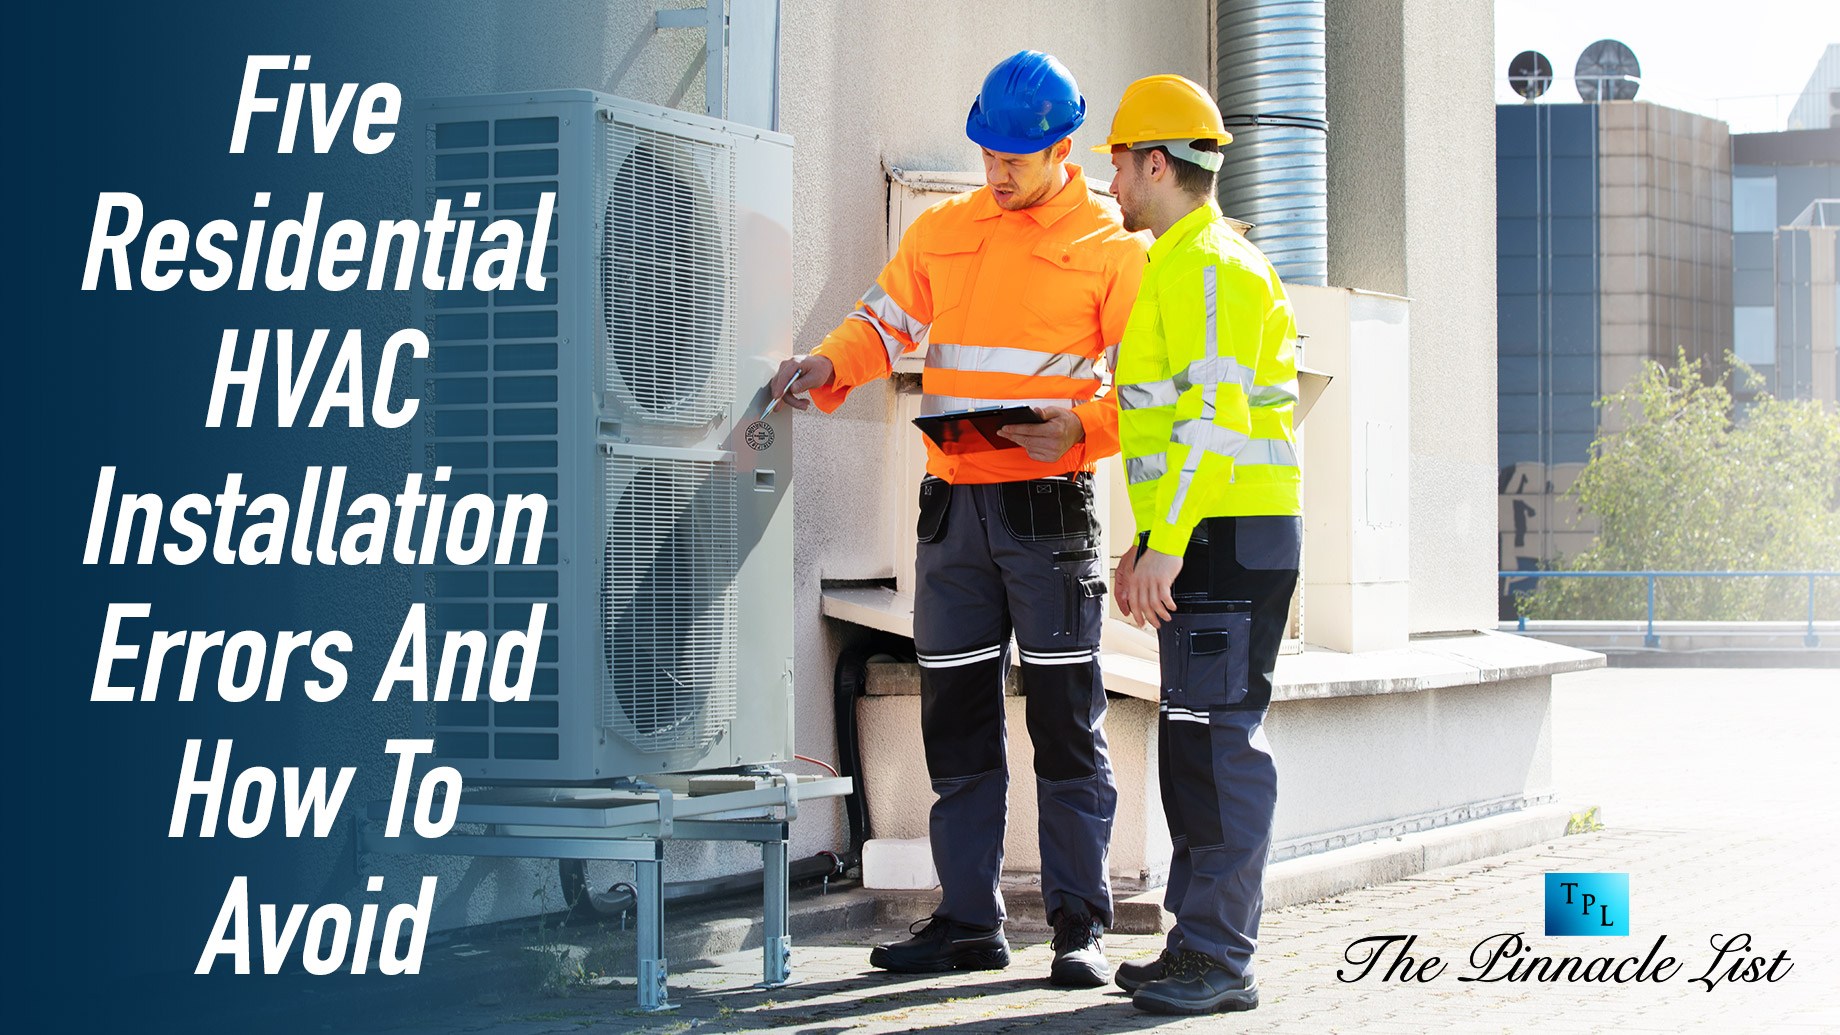 5 Residential HVAC Installation Errors And How To Avoid Them